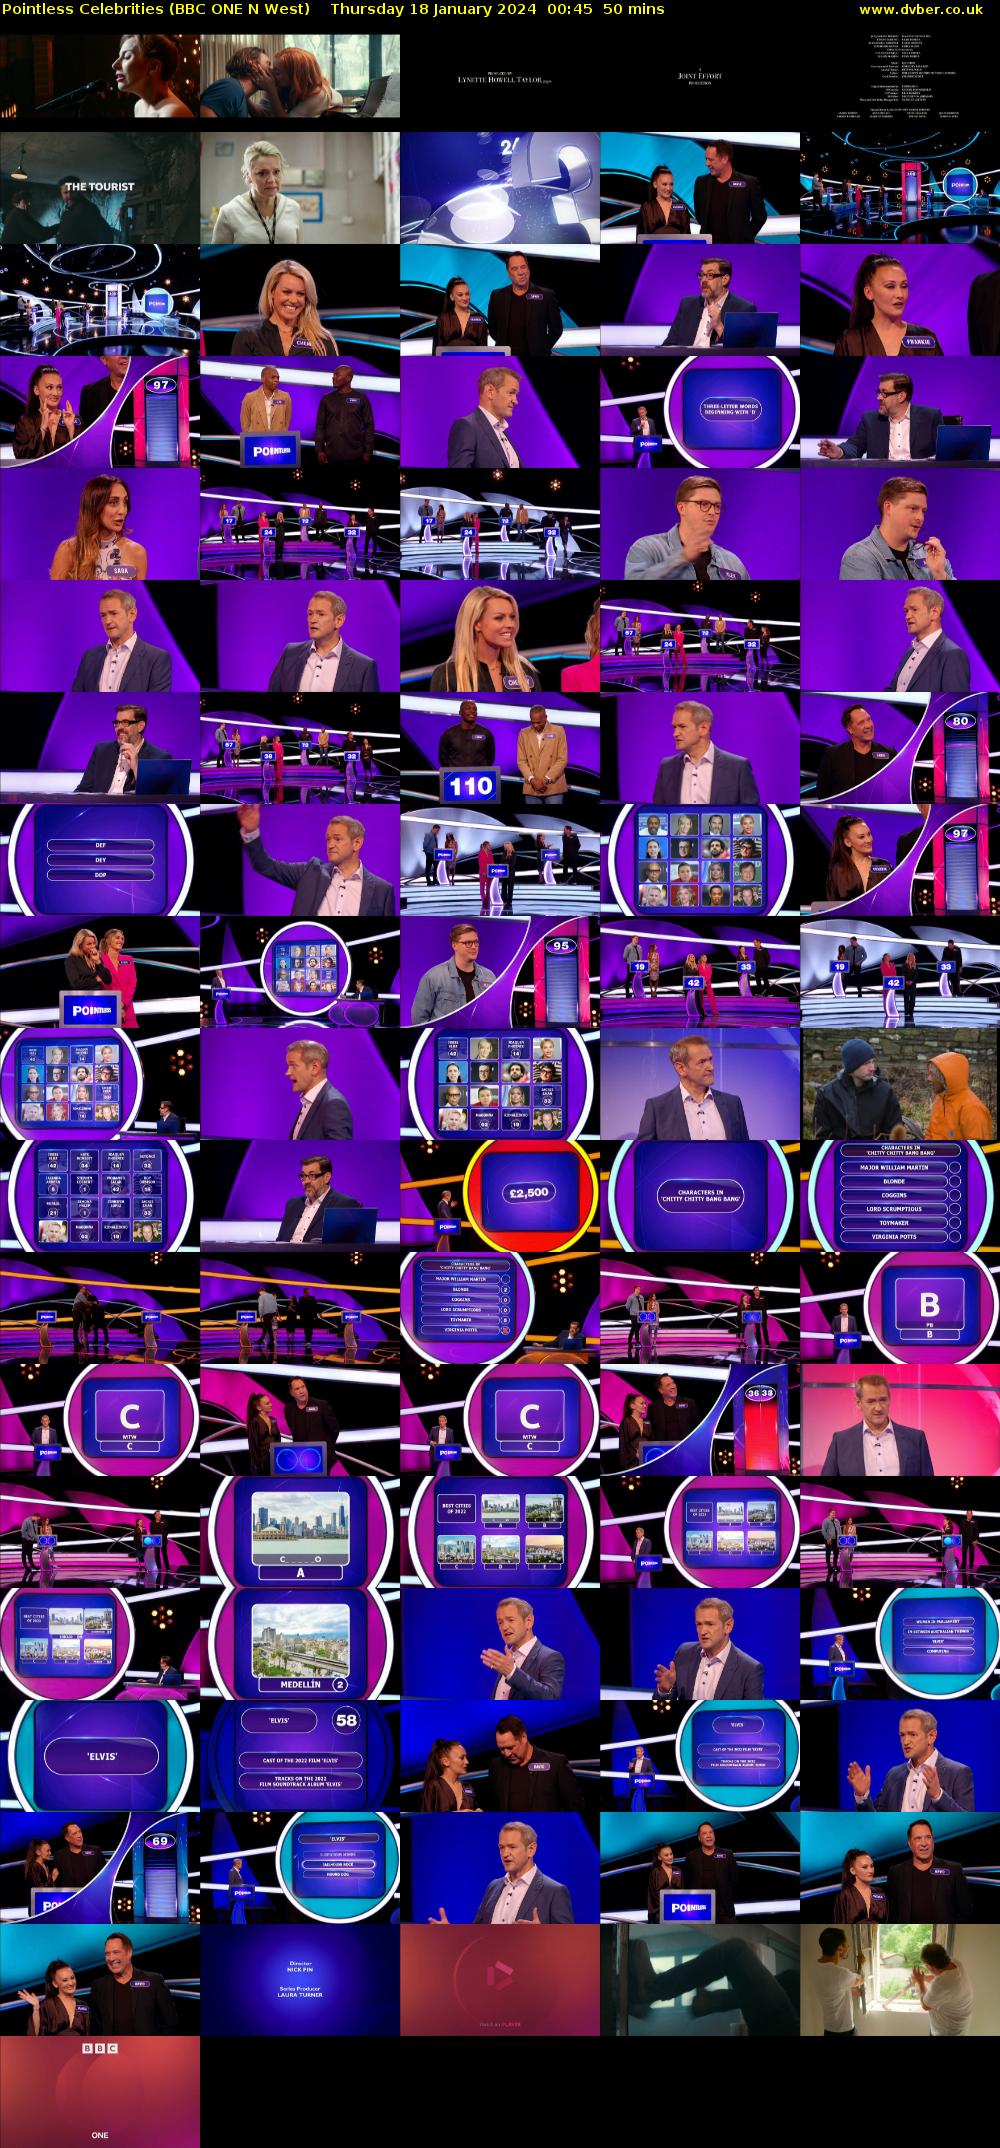 Pointless Celebrities (BBC ONE N West) Thursday 18 January 2024 00:45 - 01:35